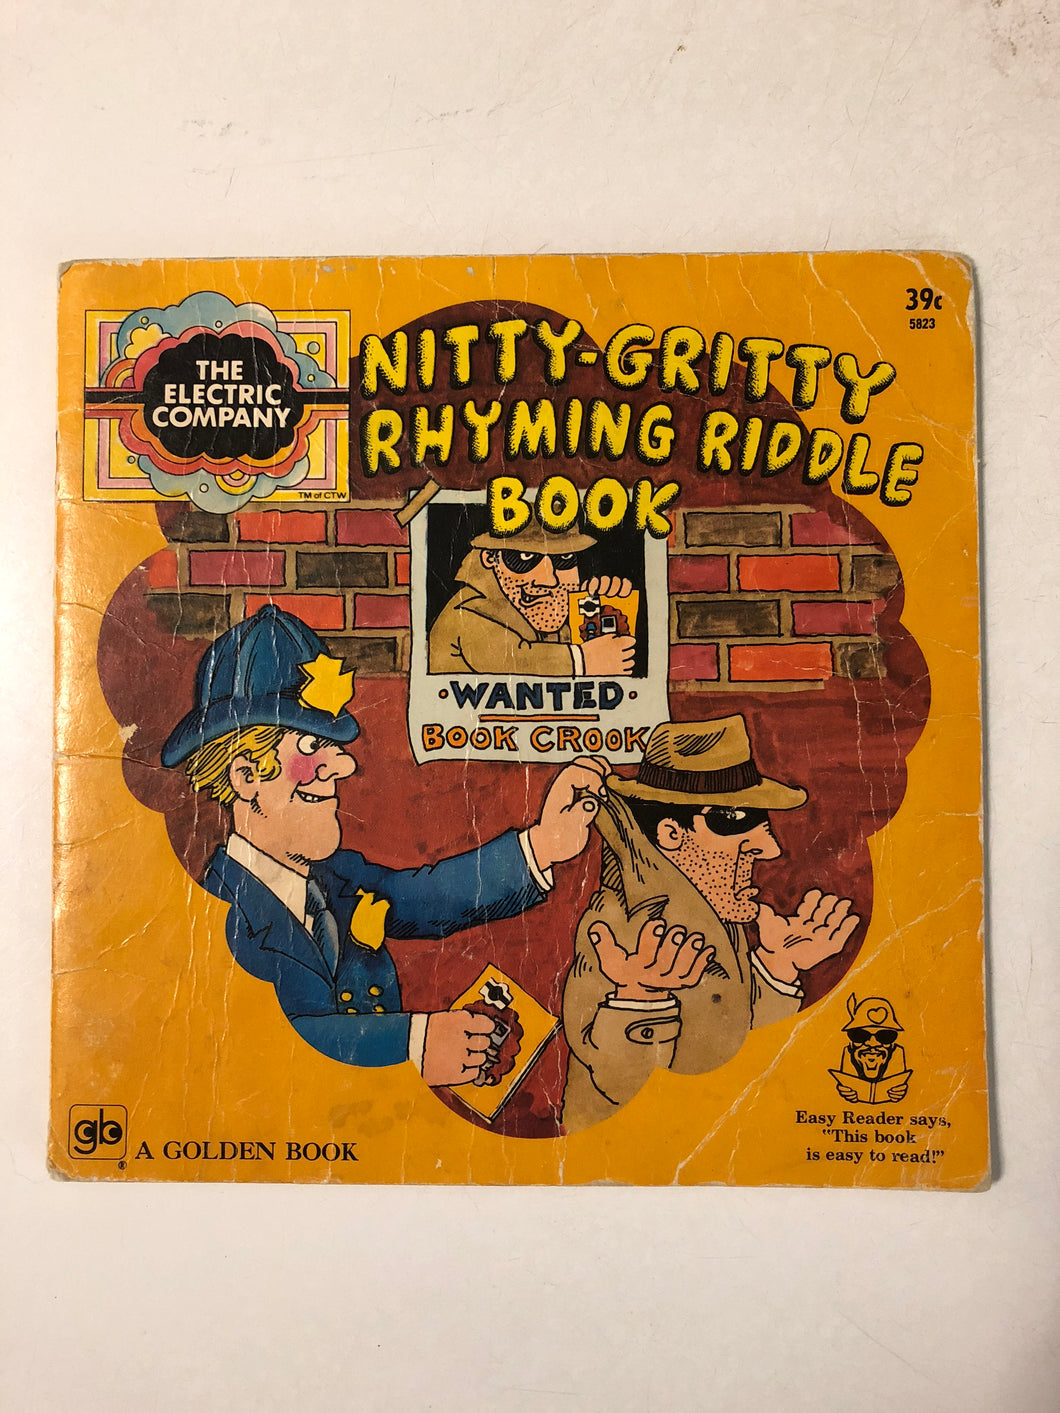 Nitty-Gritty Rhyming Riddle Book - Slick Cat Books 